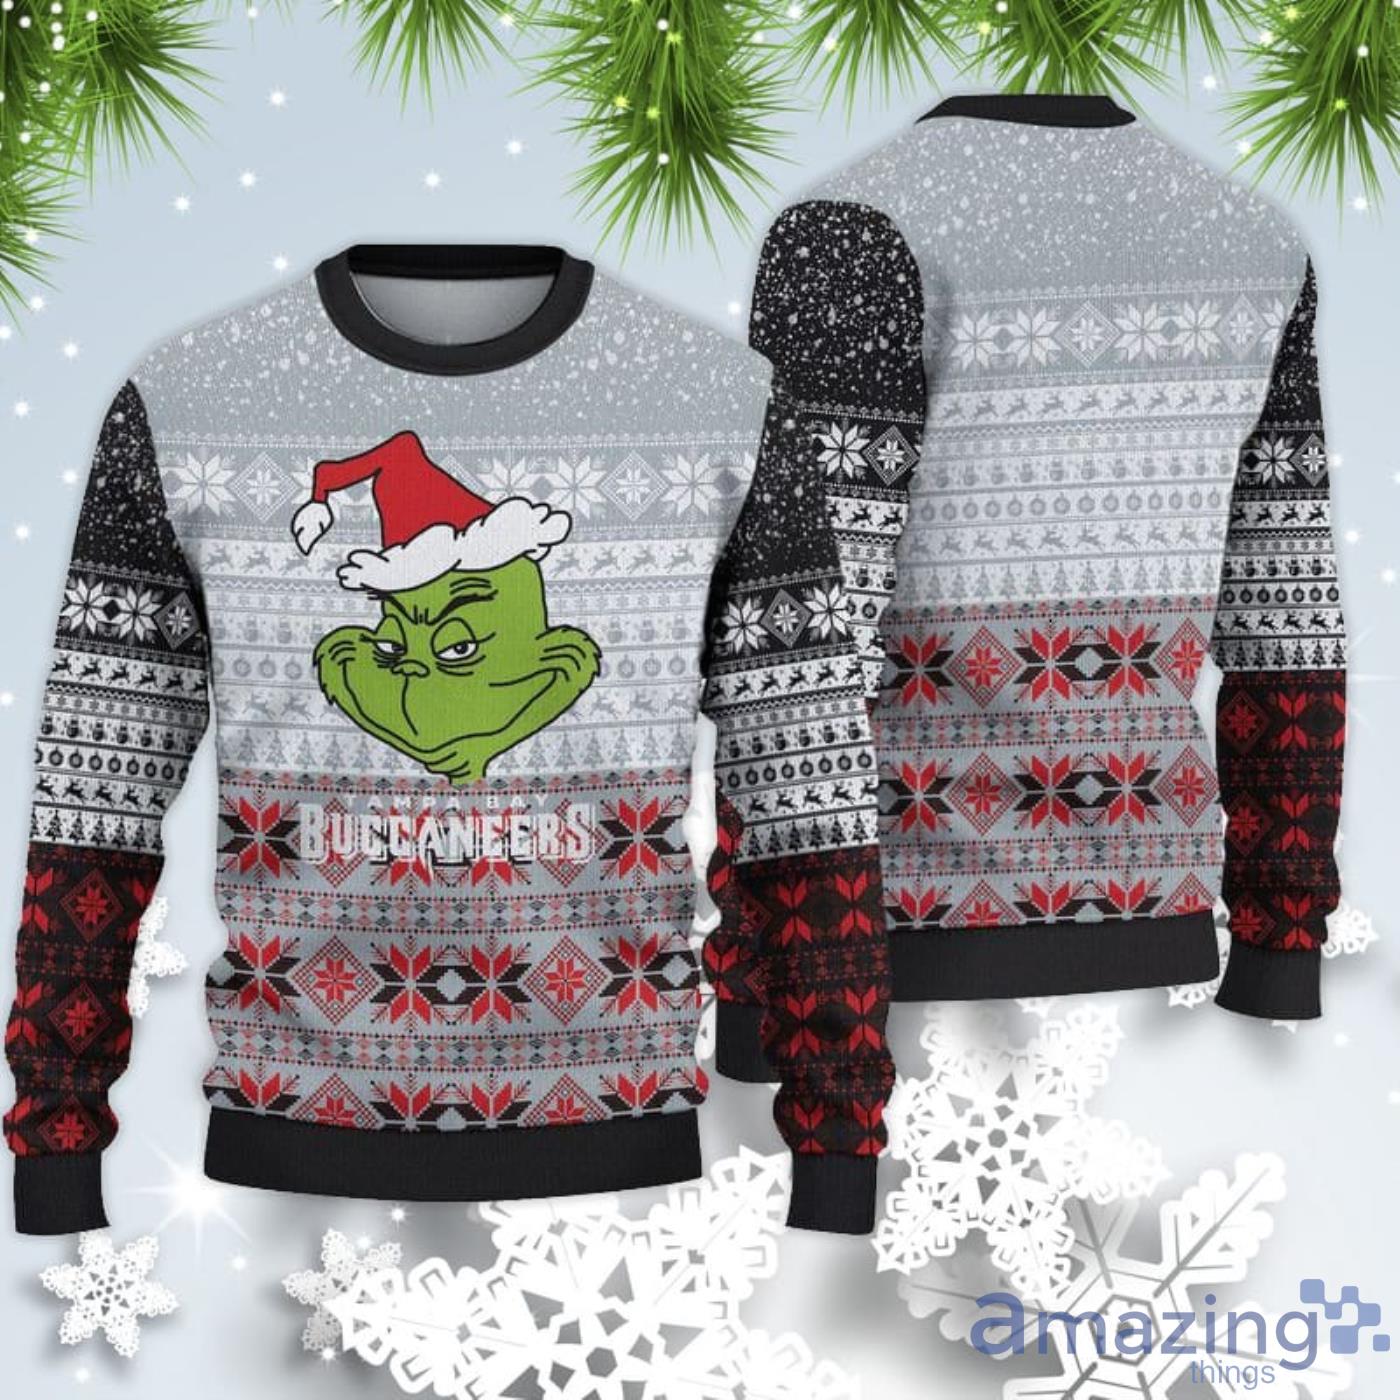 Tampa Bay Buccaneers Christmas Grinch Sweater For Fans Product Photo 1